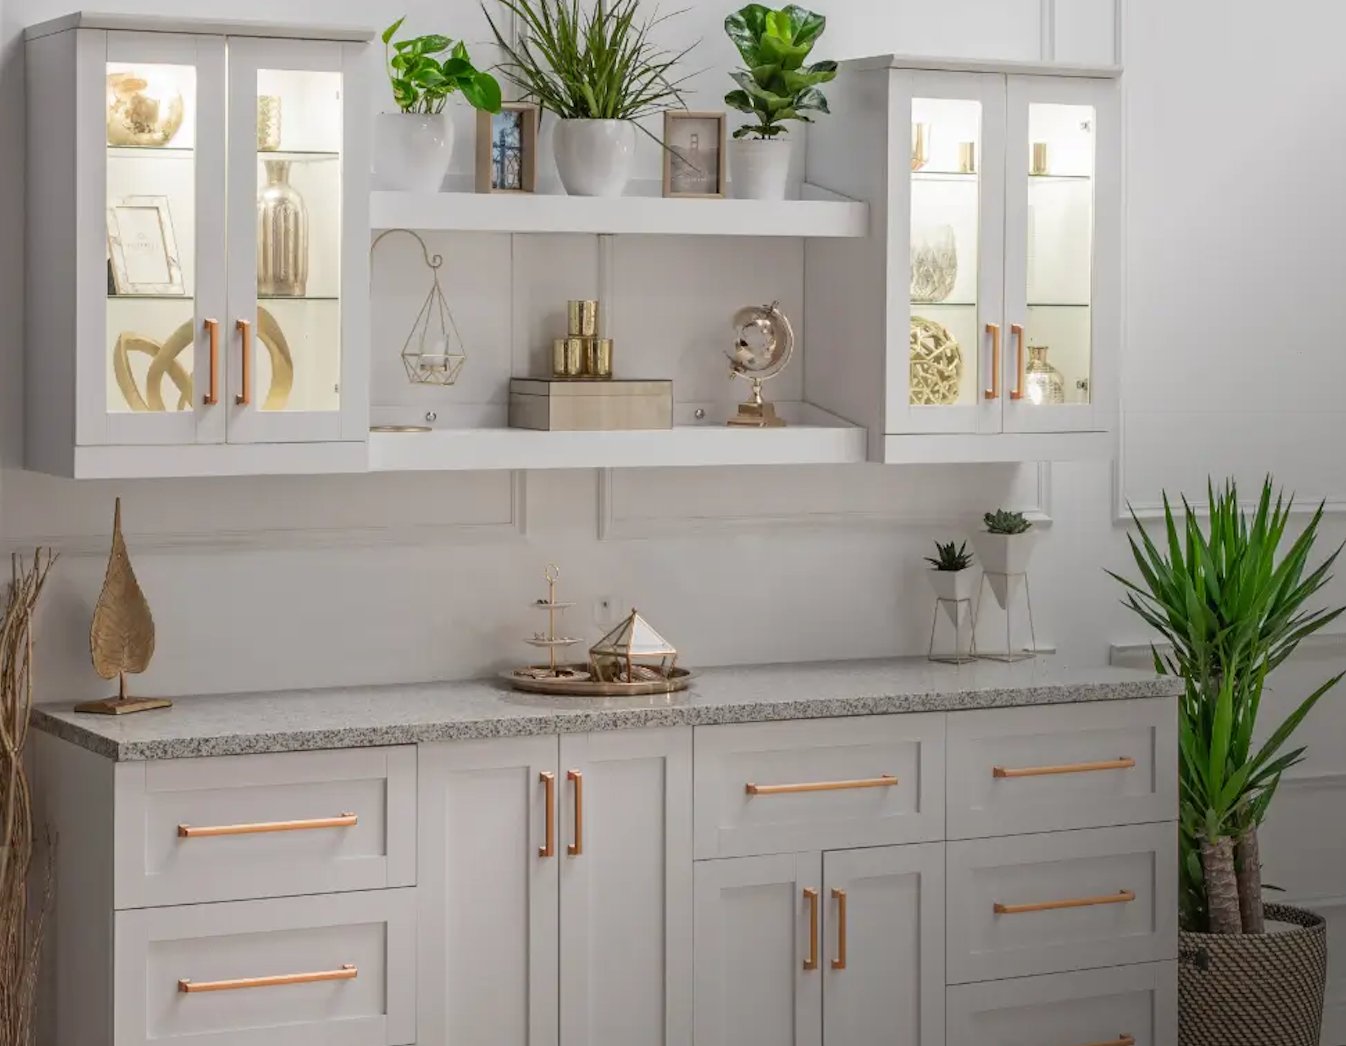 Which Home Bar Cabinet Should I Get? Our Top 4 Expert Picks